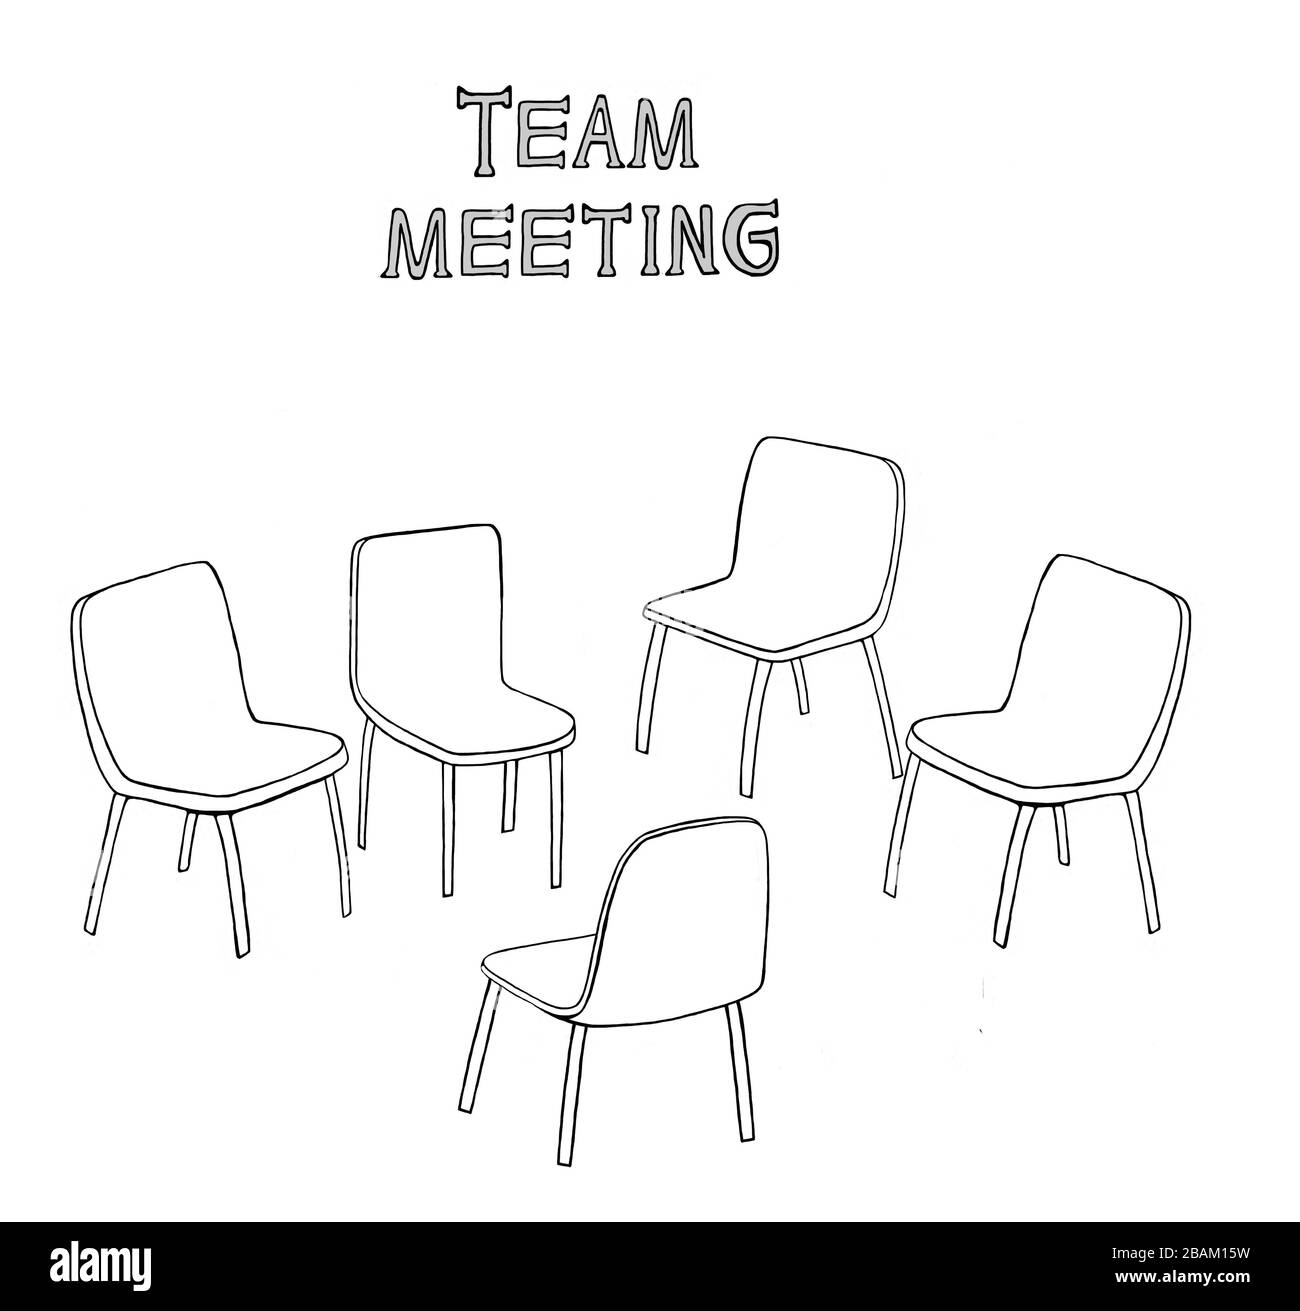 A meeting has no one attending. Stock Photo